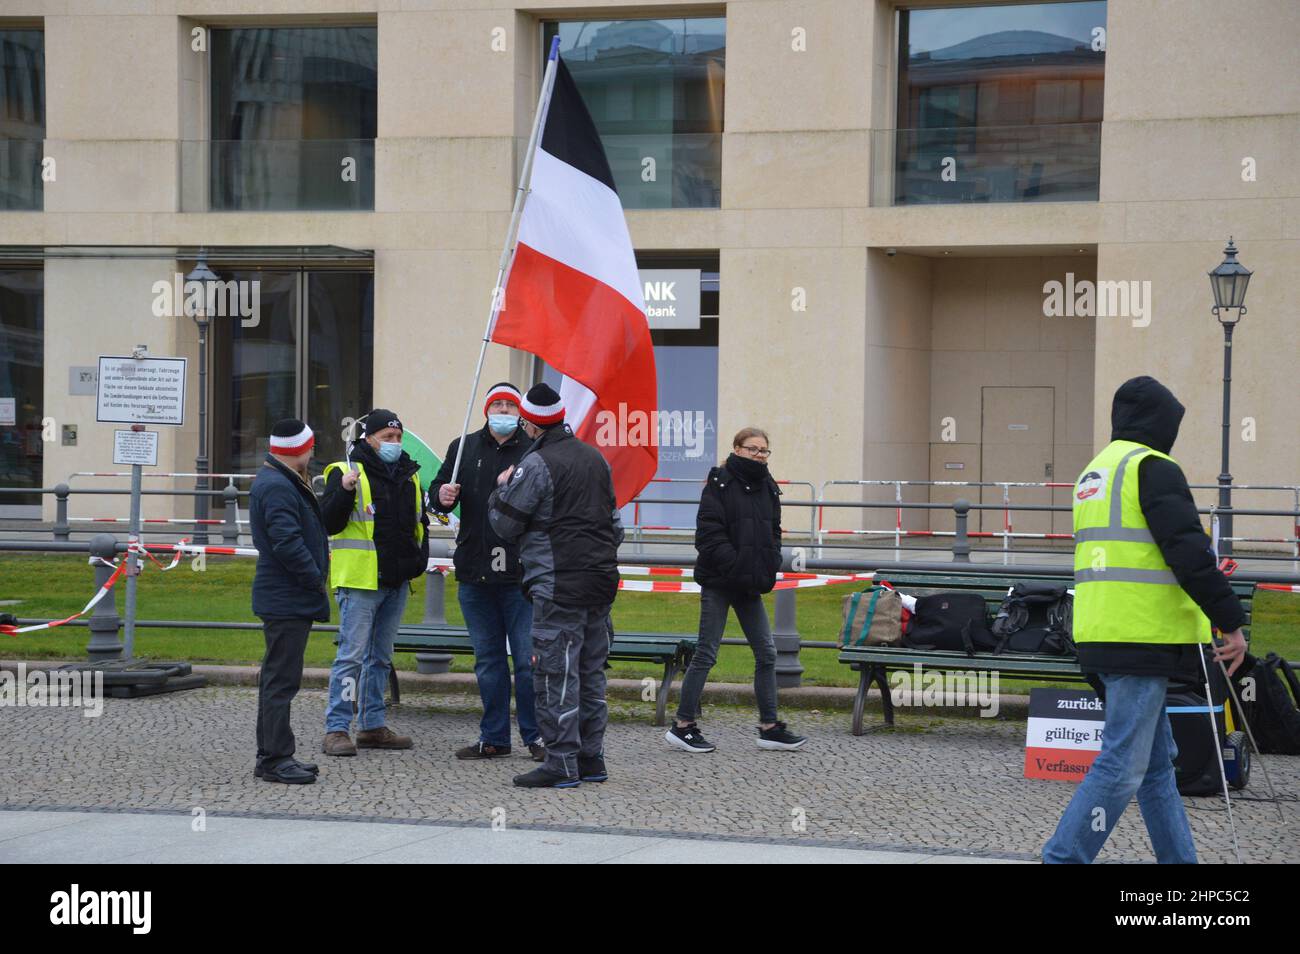 'Reich citizens' demonstrated in front of The Embassy of The United States of America at Pariser Platz in Berlin, Germany. 'Reich citizens'  rejict the legitimacy of the modern German state, The Federal Republic of Germany, in favour of the German Reich, which existed from 1871 to 1945. Stock Photo